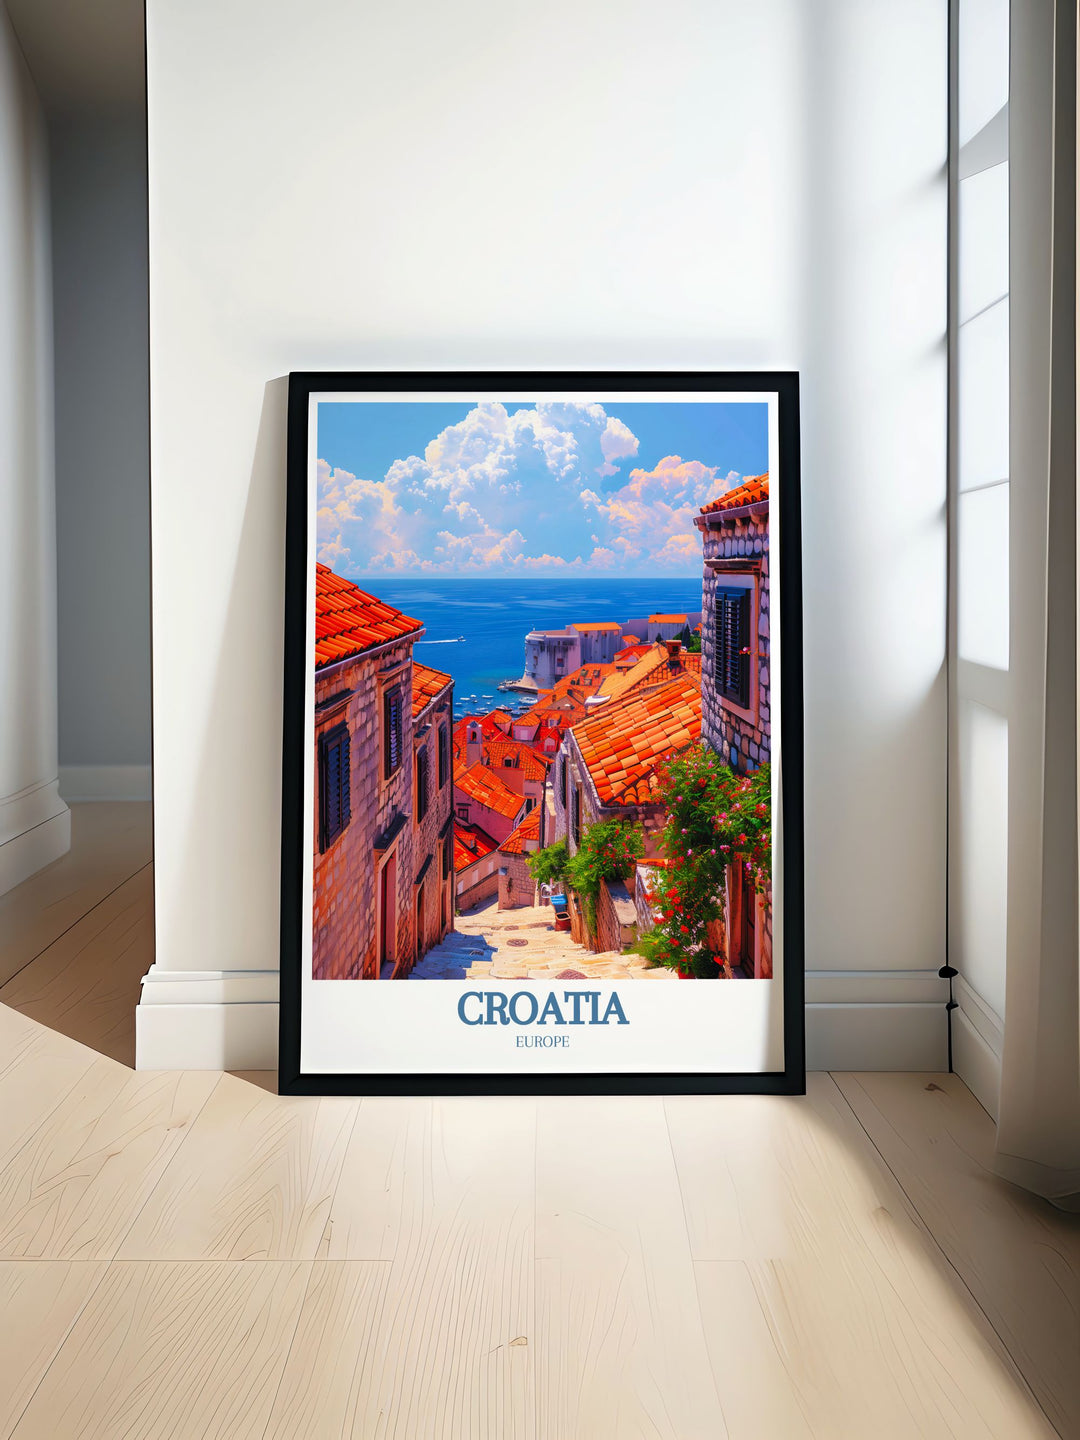 This travel poster captures the essence of Split and the adventure of exploring the Adriatic Sea, highlighting their unique beauty and significance, making it perfect for enhancing your home decor with Croatias charm.